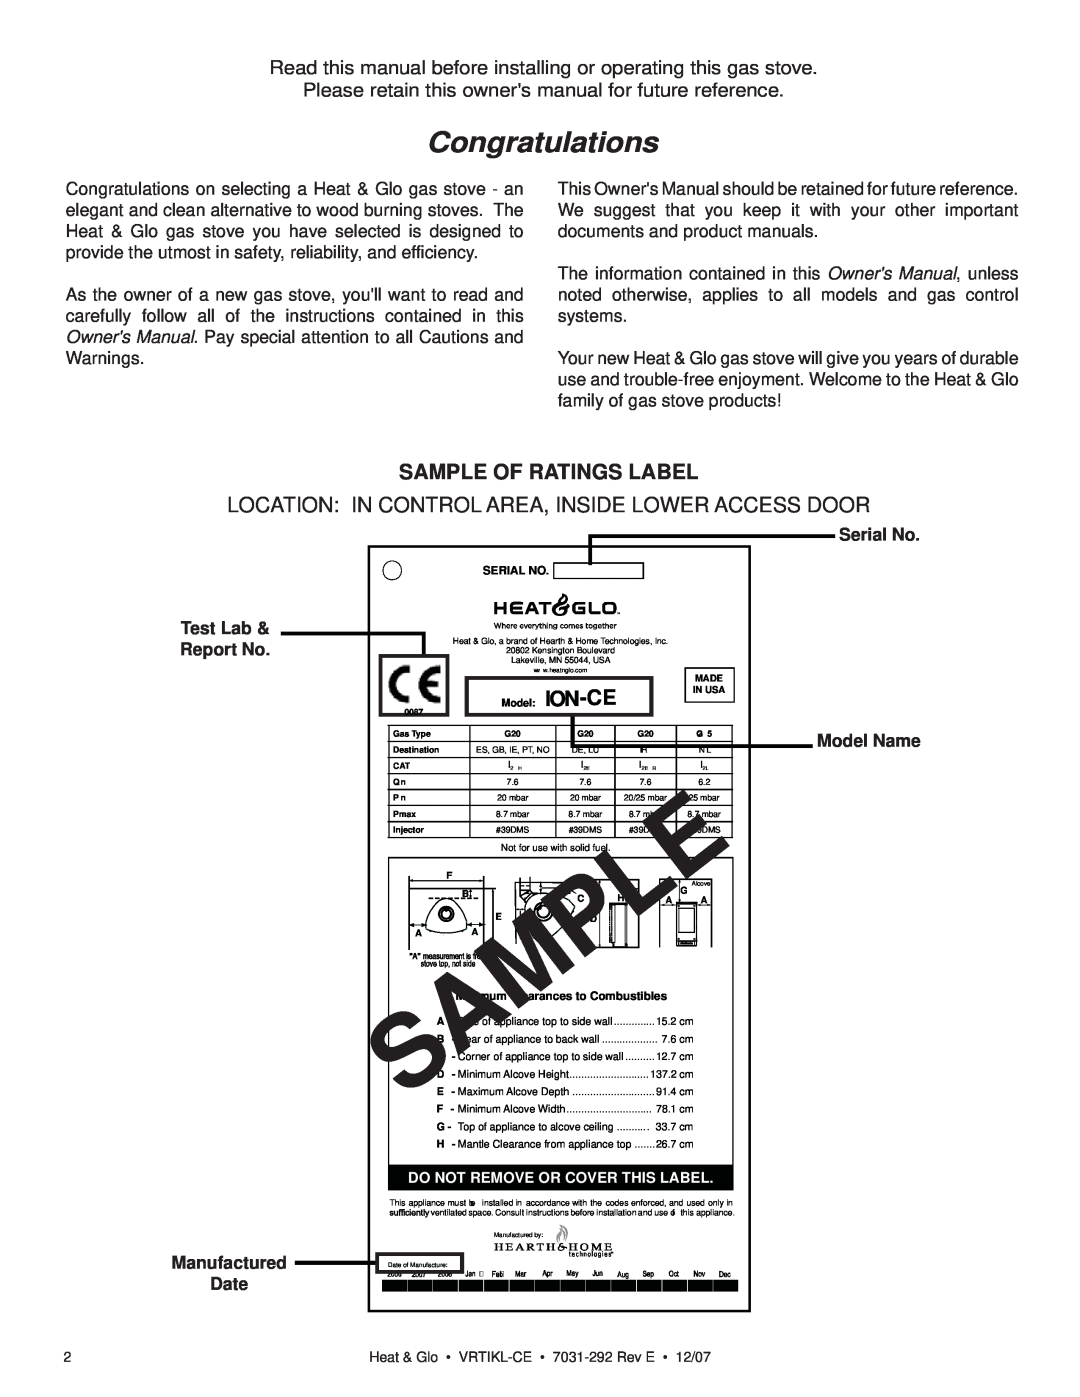 Hearth and Home Technologies VRT-GY-N-CE Sample Of Ratings Label, Congratulations, Test Lab Report No Manufactured Date 